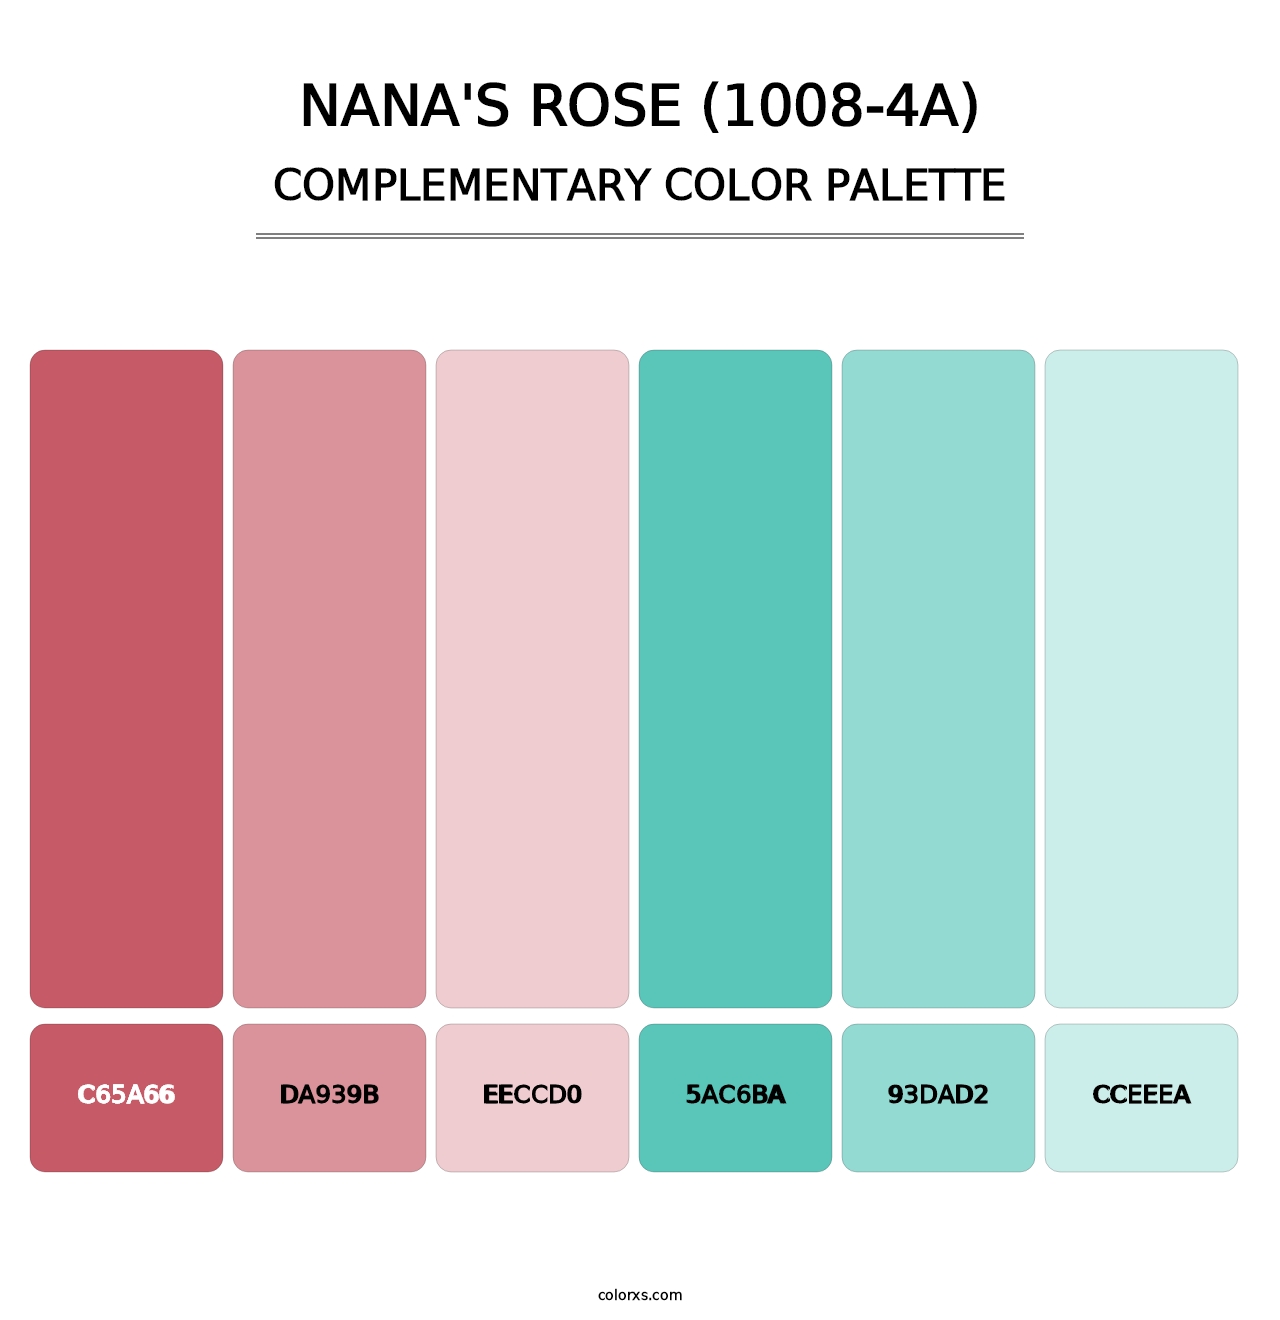 Nana's Rose (1008-4A) - Complementary Color Palette